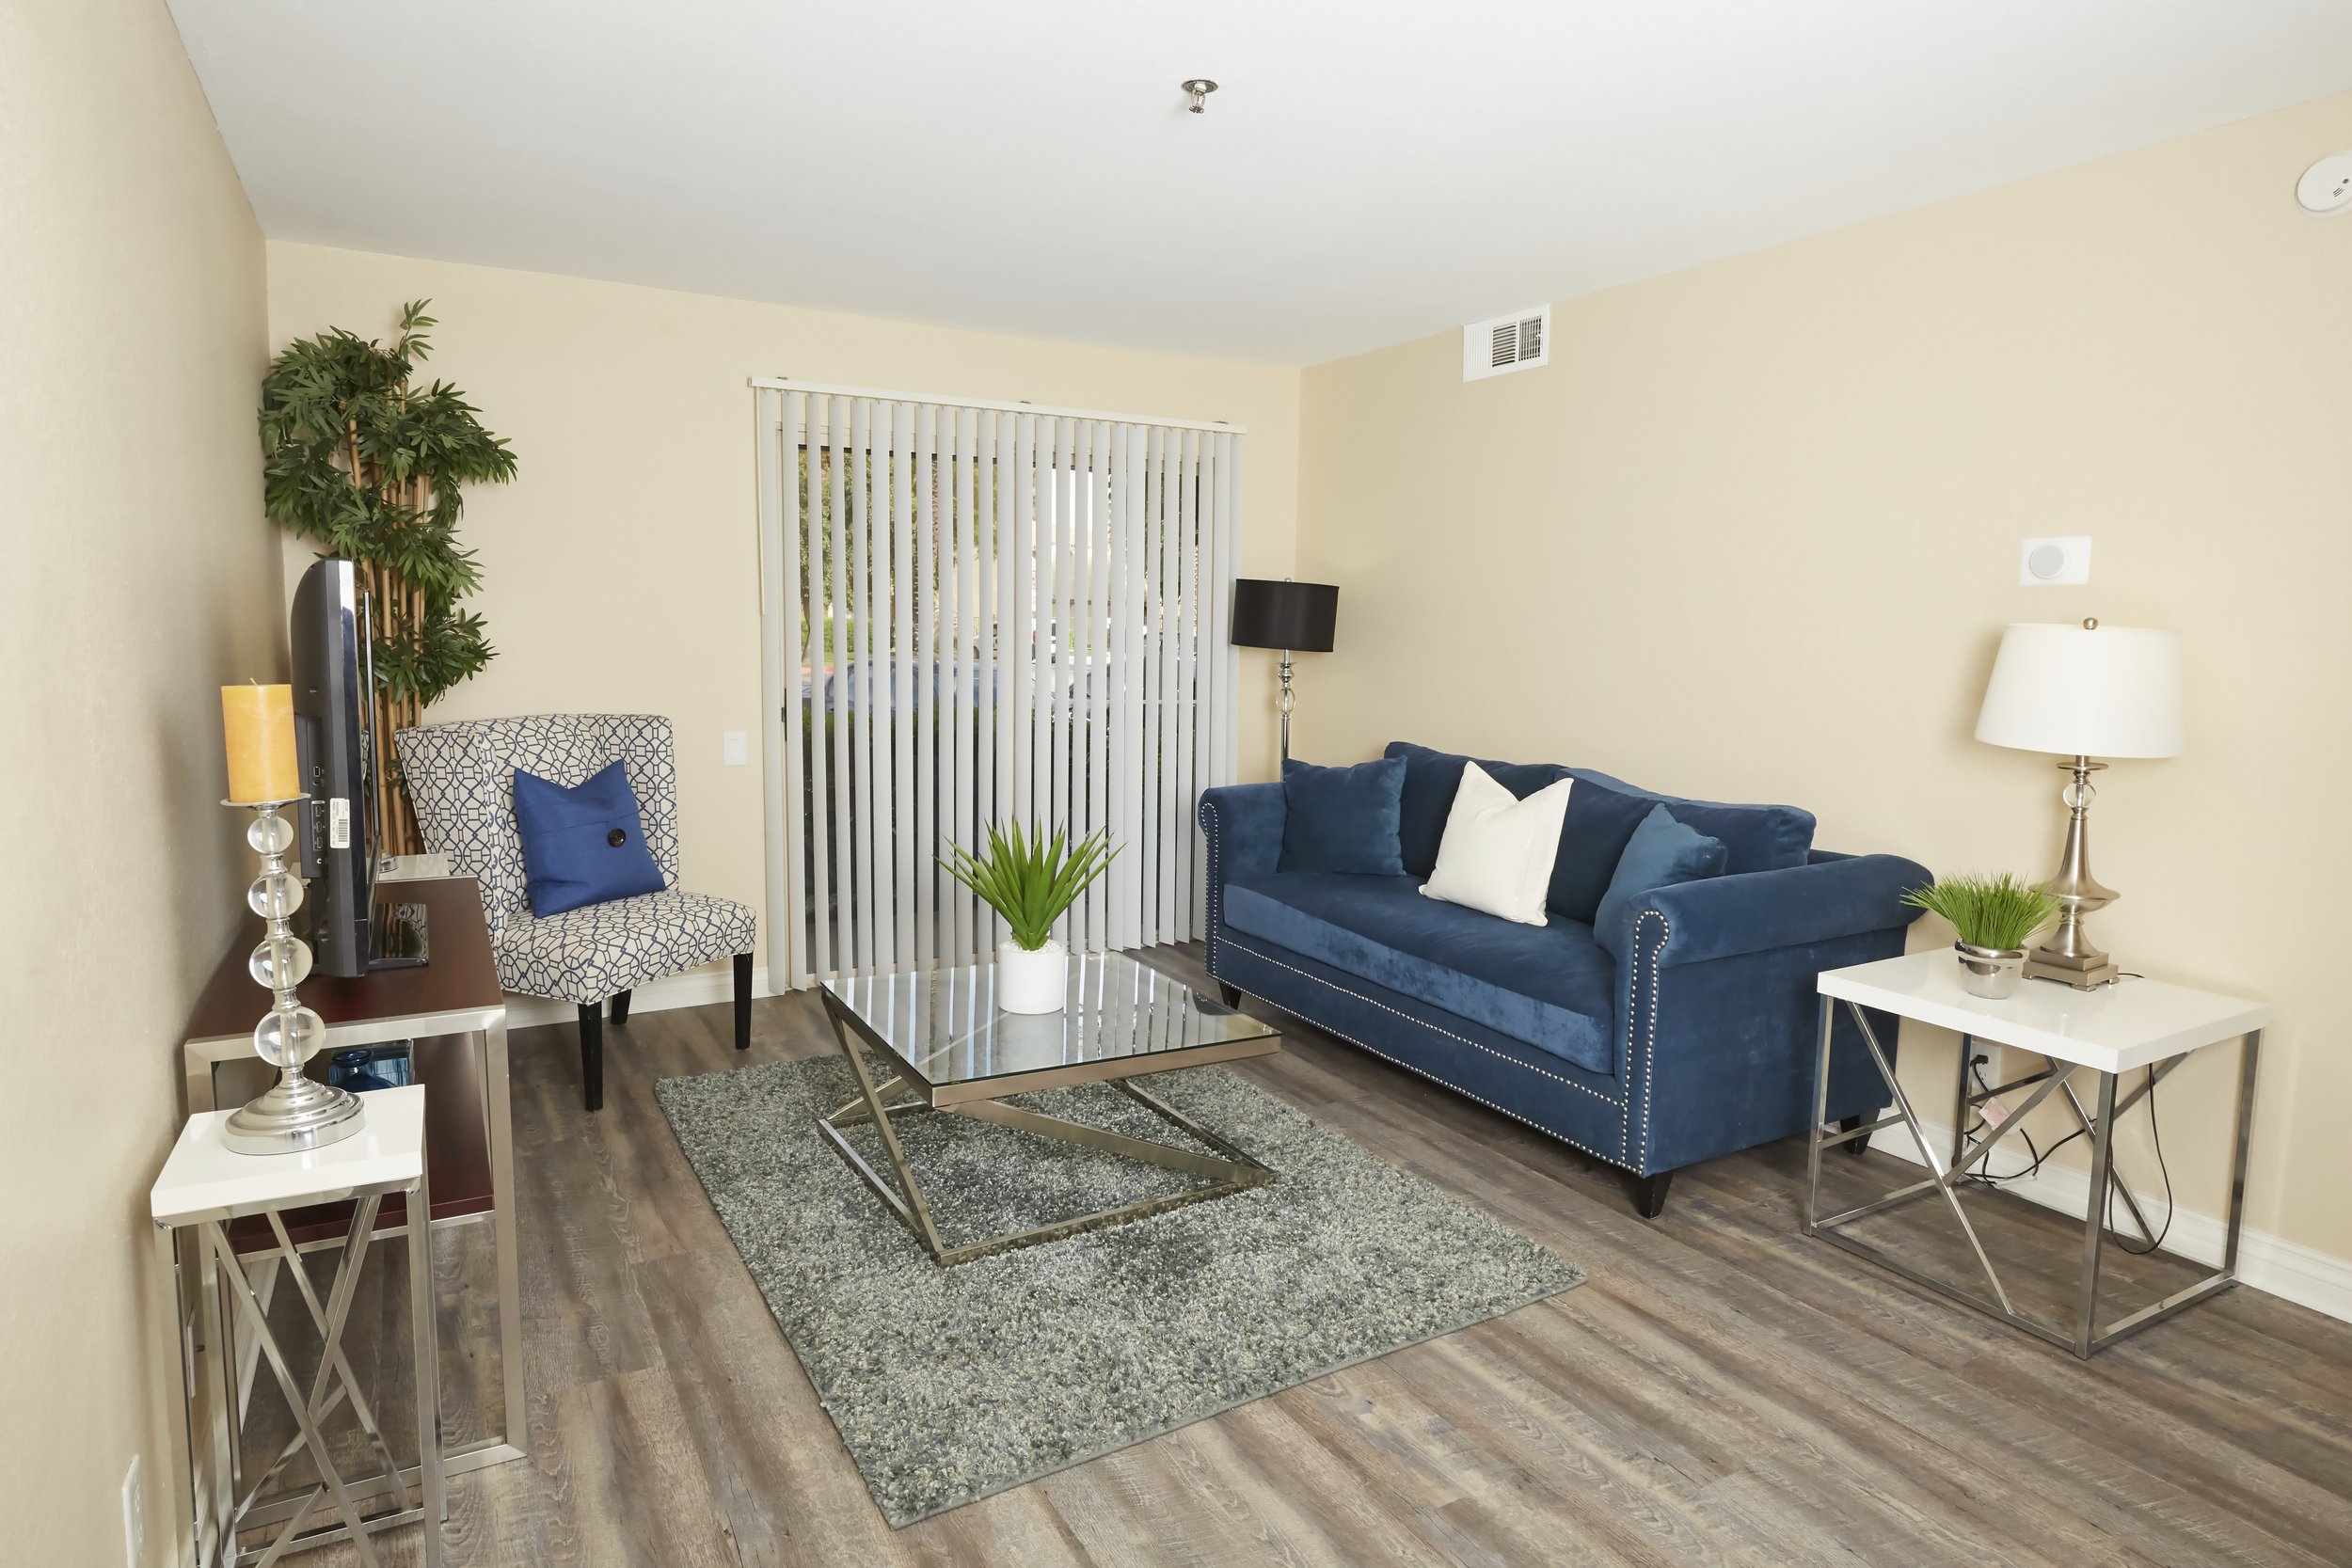  Spacious living room with plank flooring throughout and an entrance to your private patio 